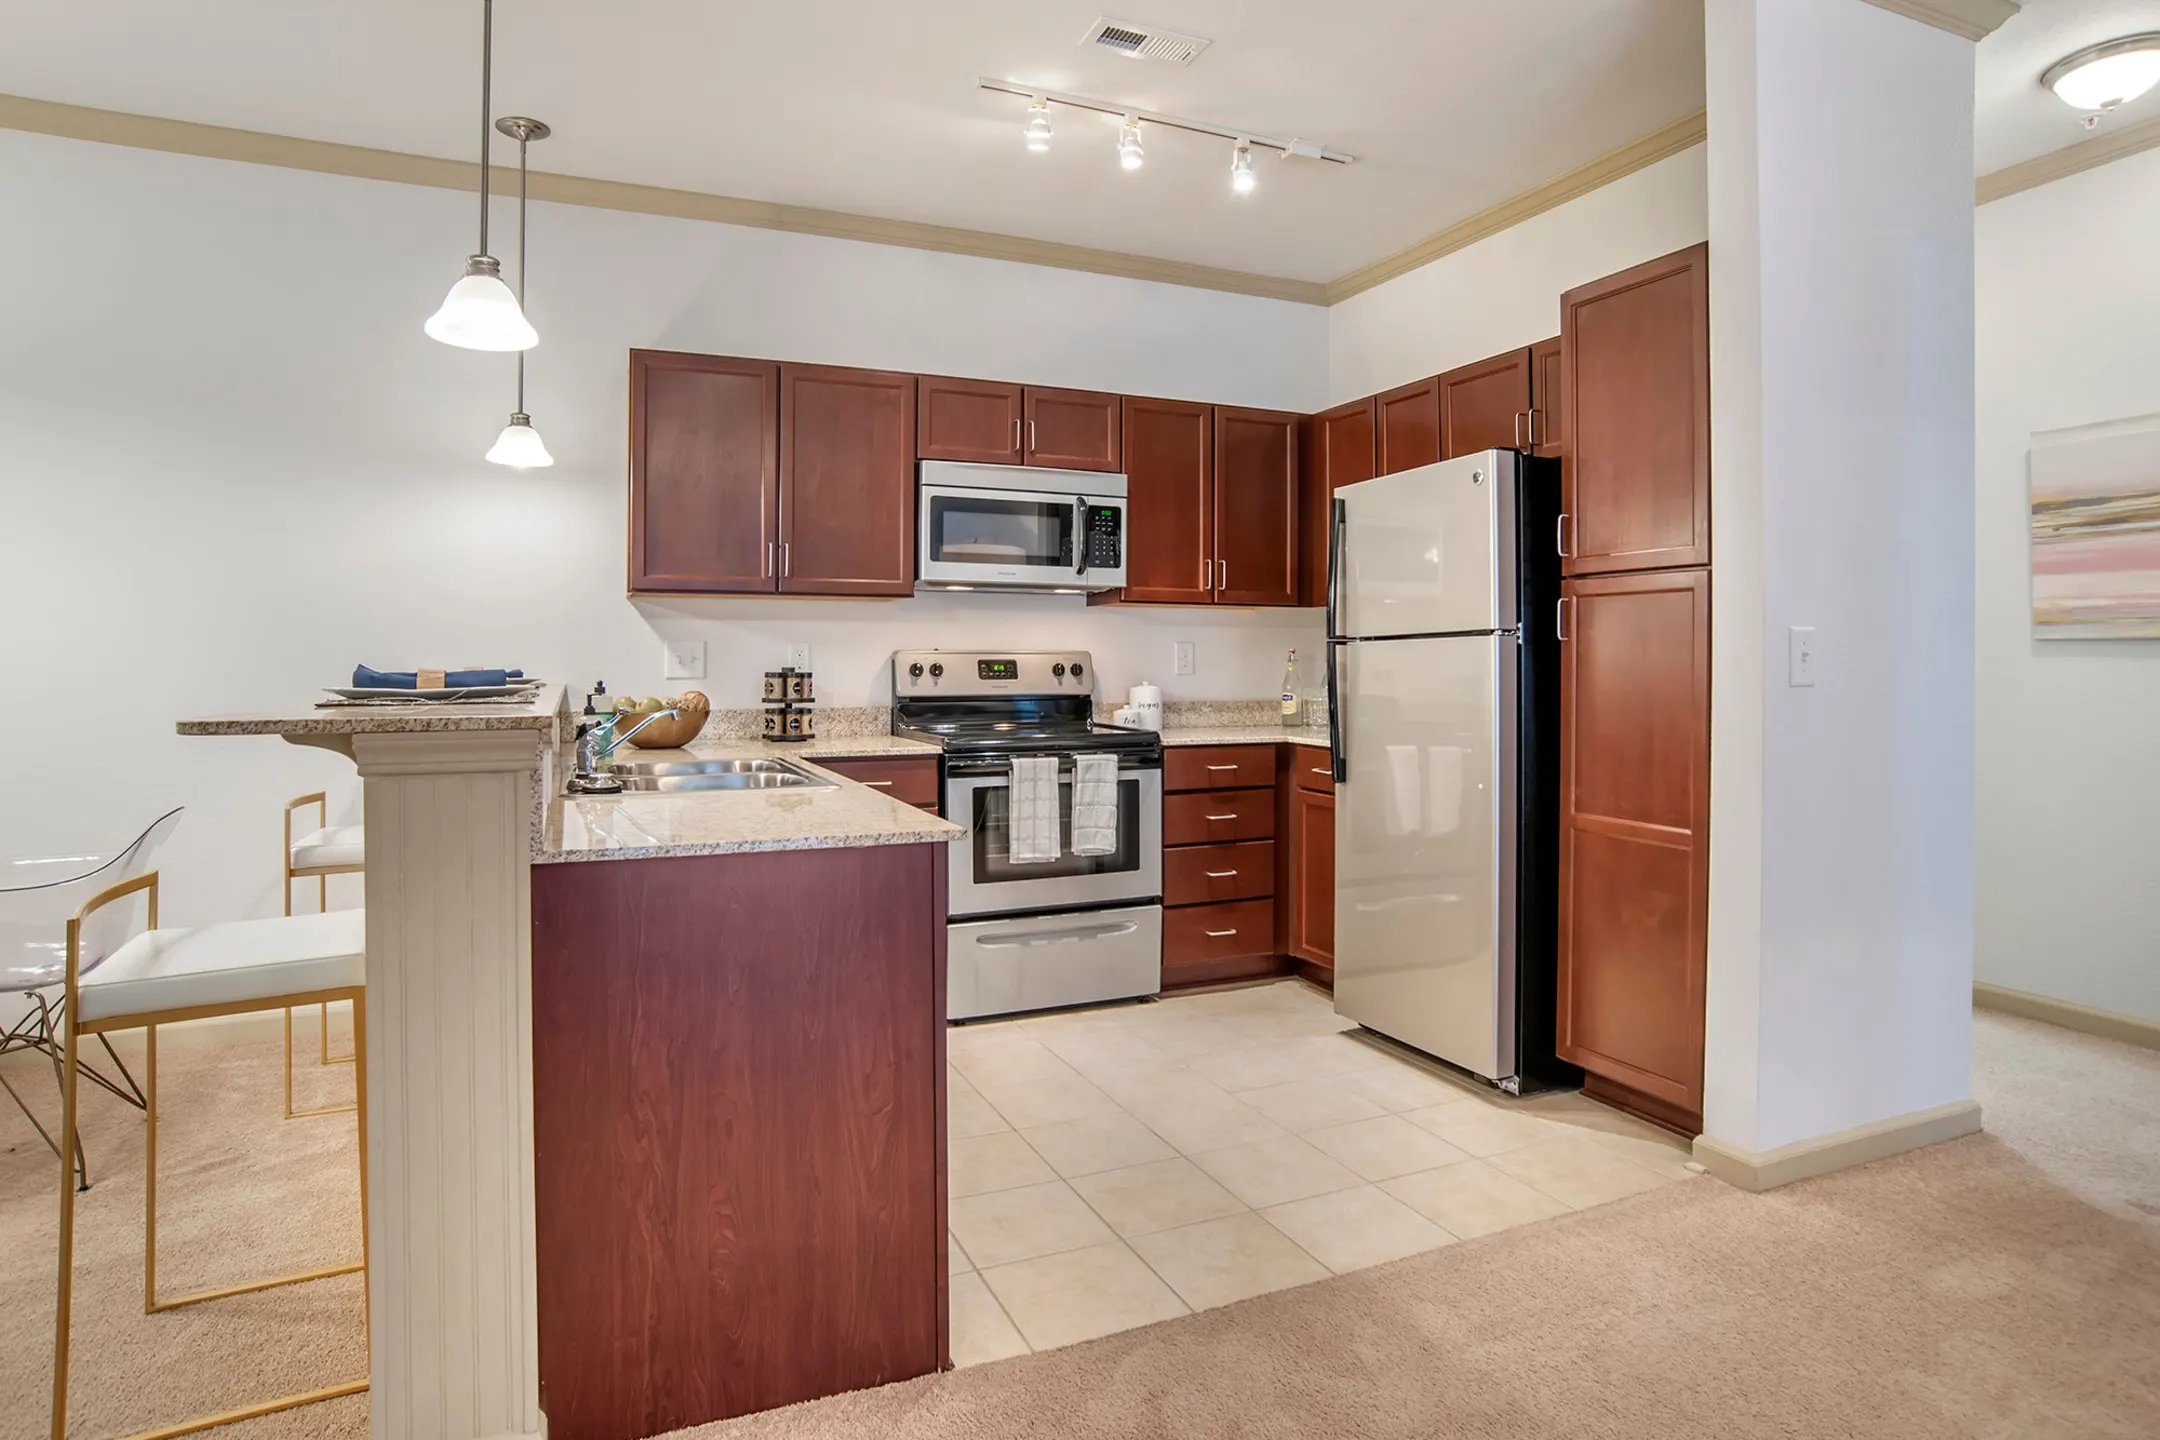 Kitchen - Broadstreet At EastChase Apartments - Montgomery, AL